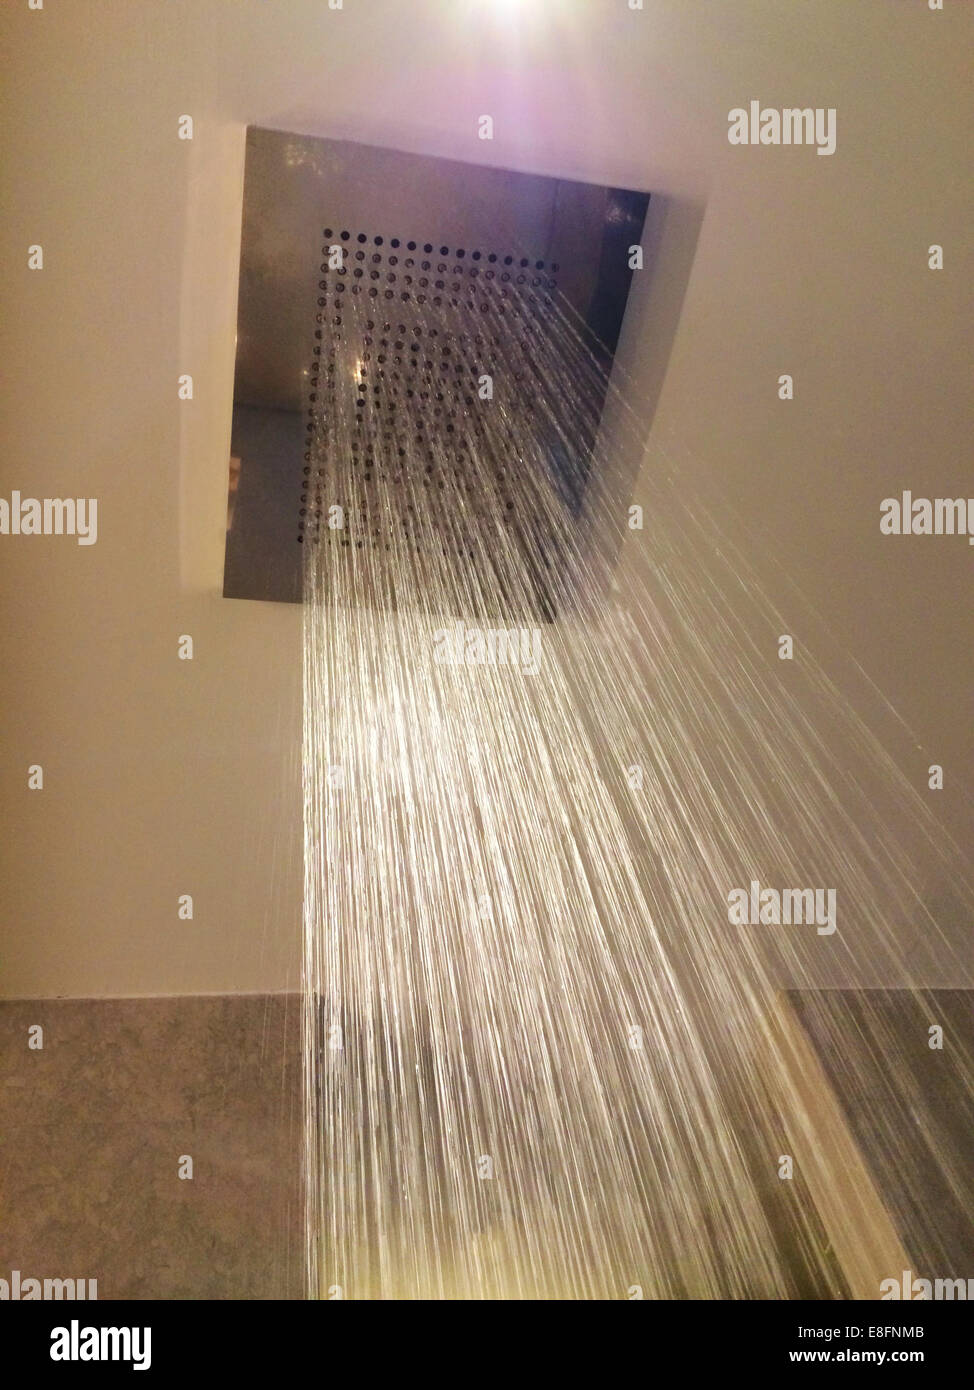 Low angle view of running shower Stock Photo - Alamy